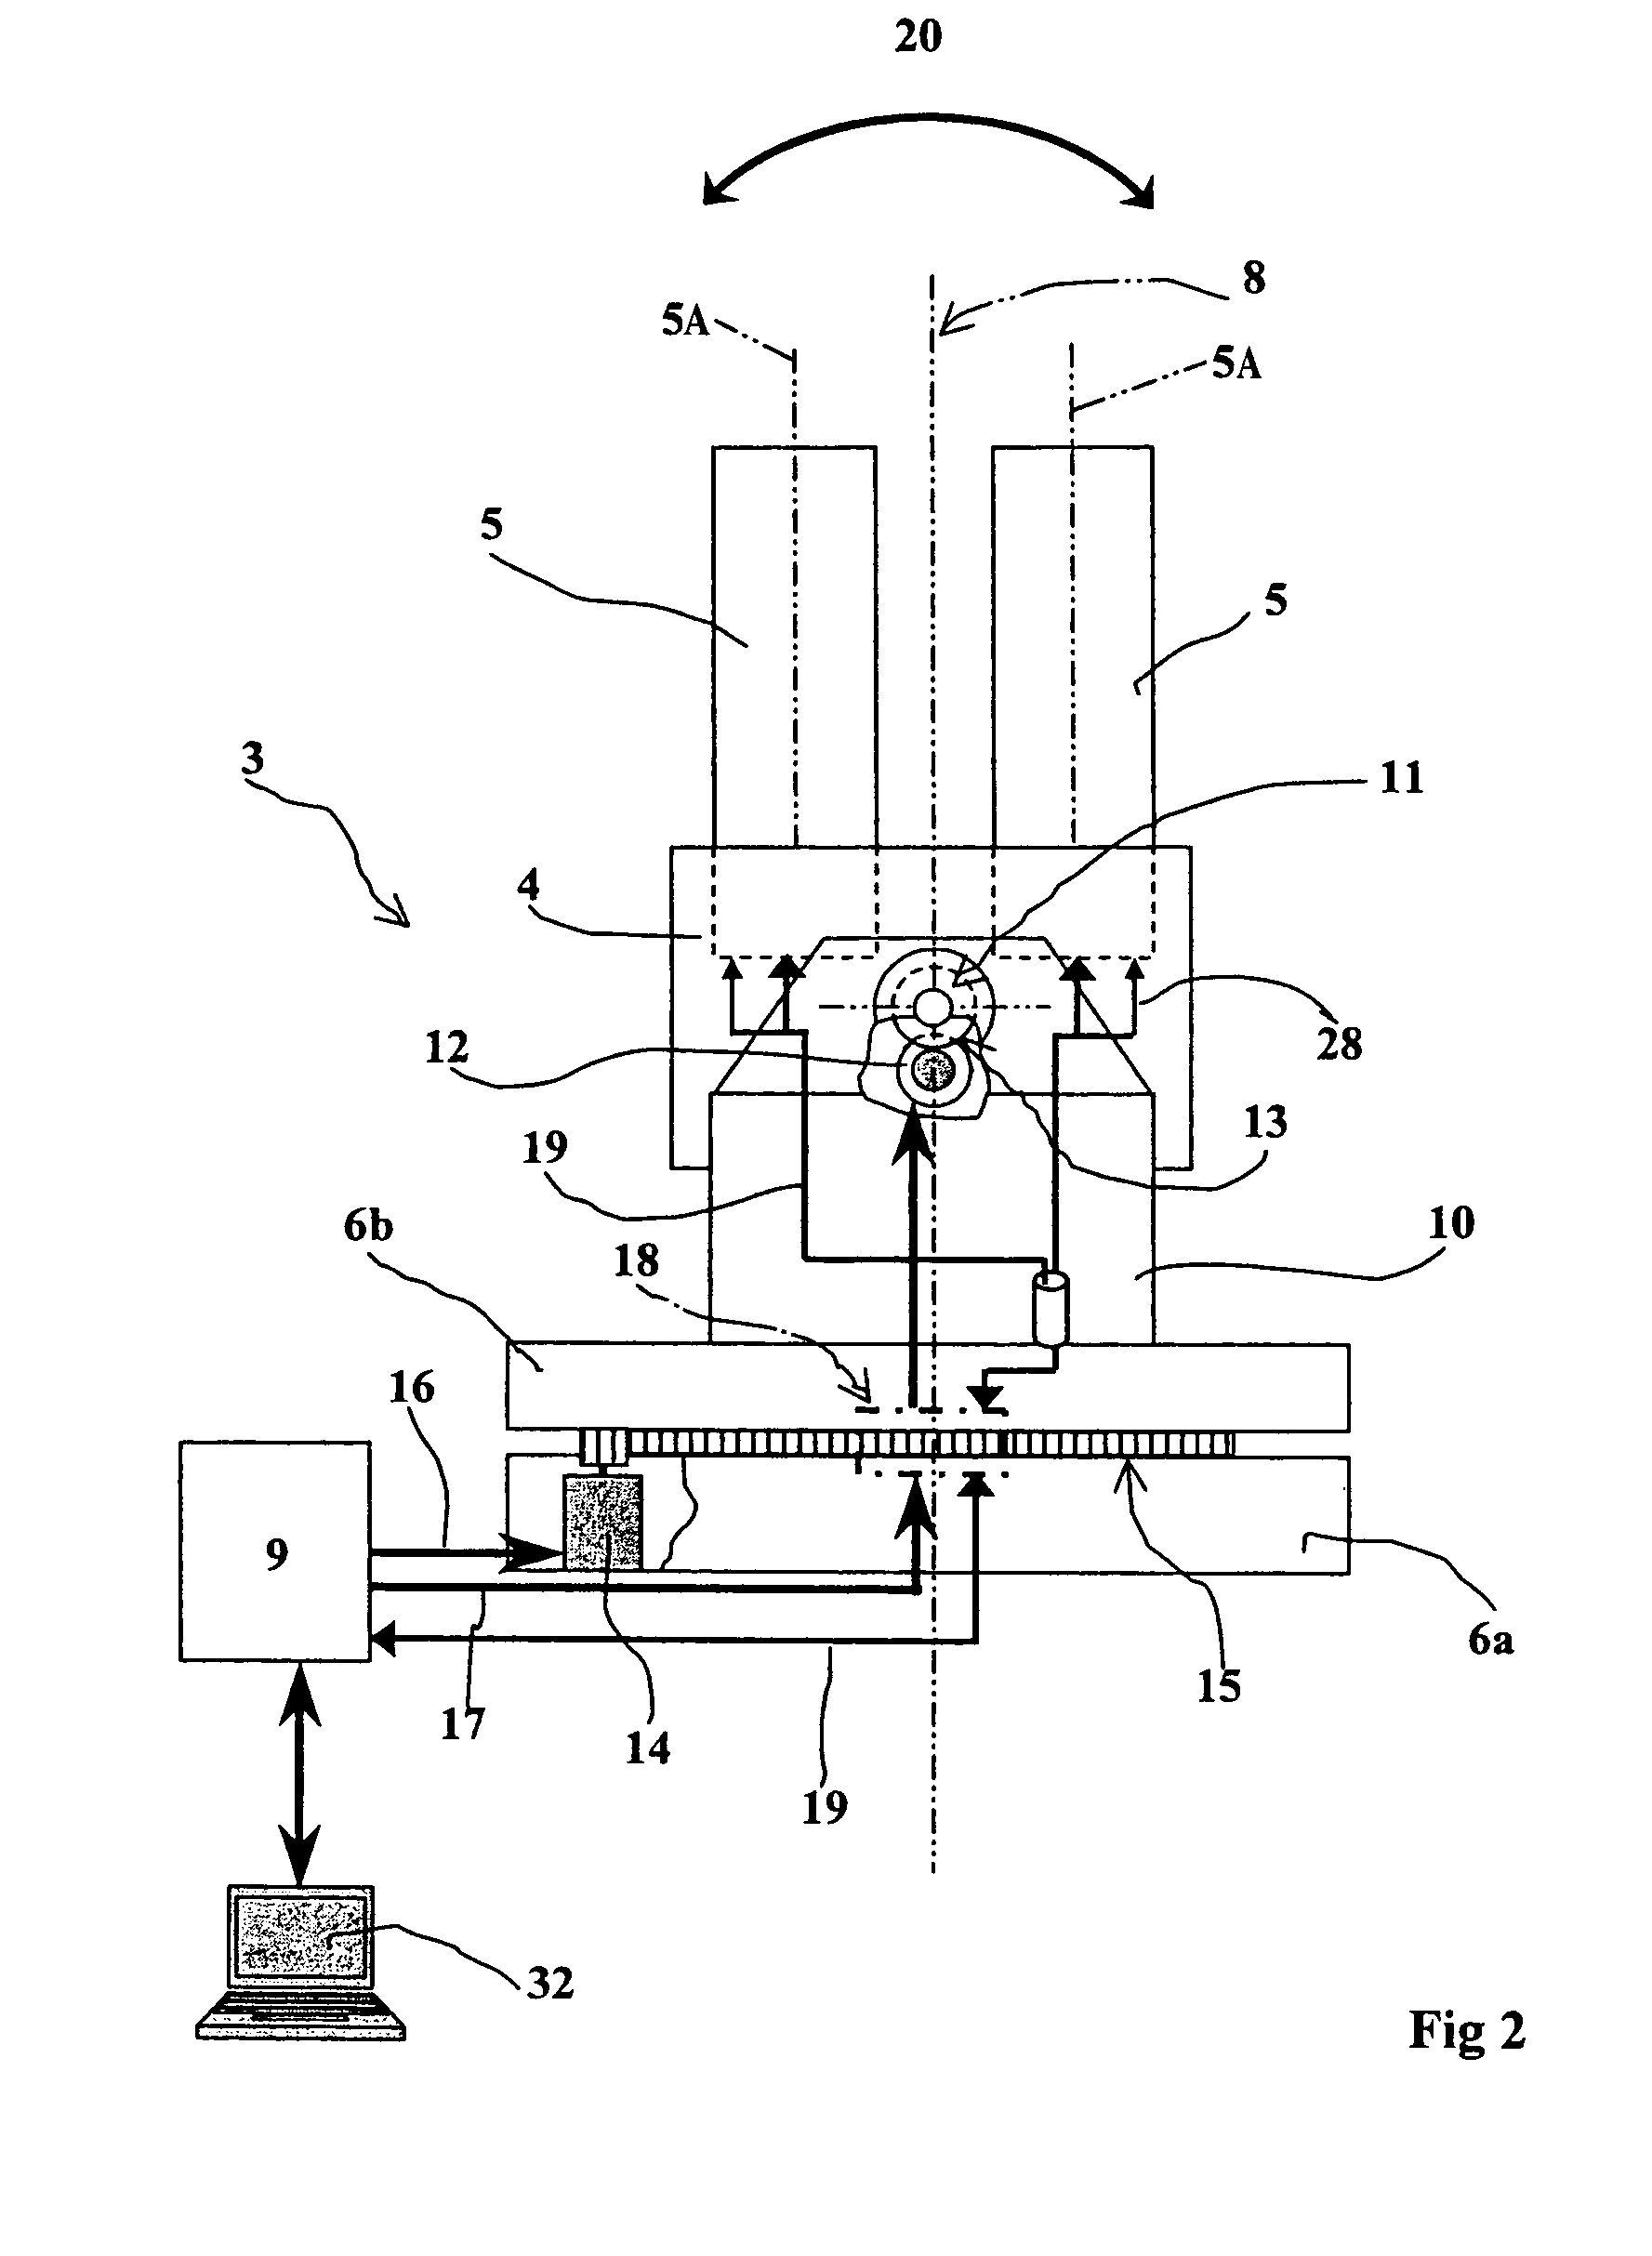 Projectile firing device